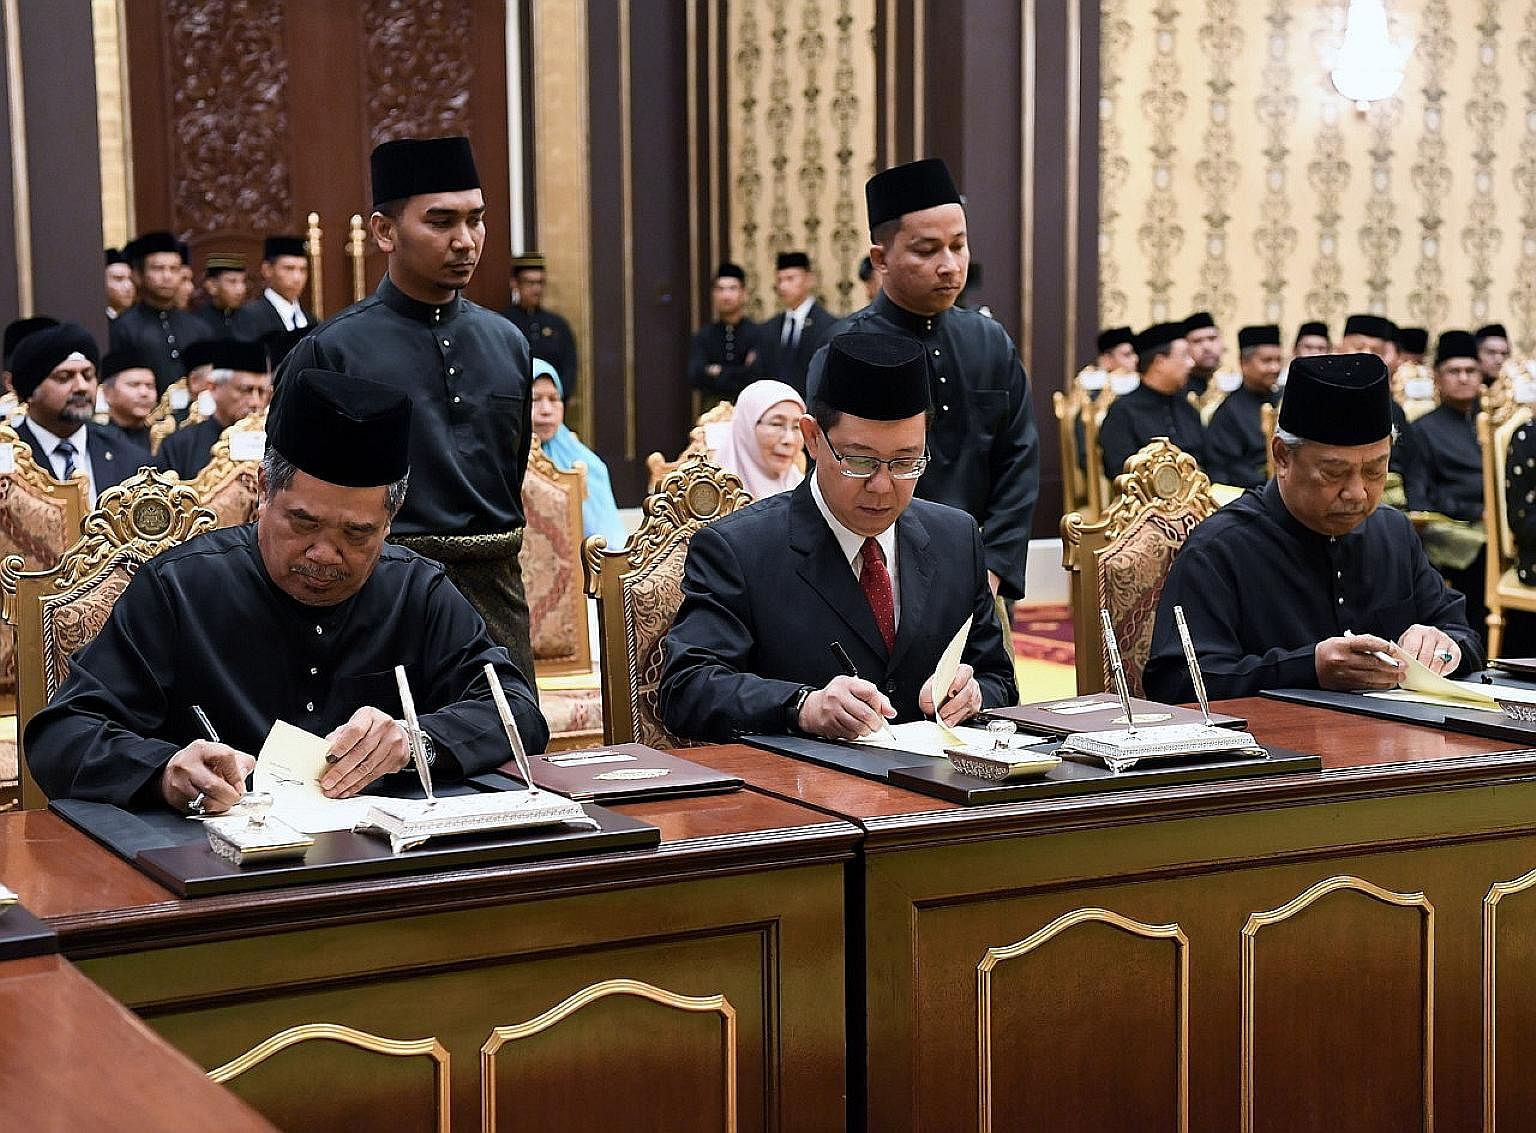 From left: Defence Minister Mohamad Sabu, Finance Minister Lim Guan Eng and Home Minister Muhyiddin Yassin signing their appointment letters at the Istana Negara in Kuala Lumpur yesterday. They were among 13 members of Tun Dr Mahathir Mohamad's core 